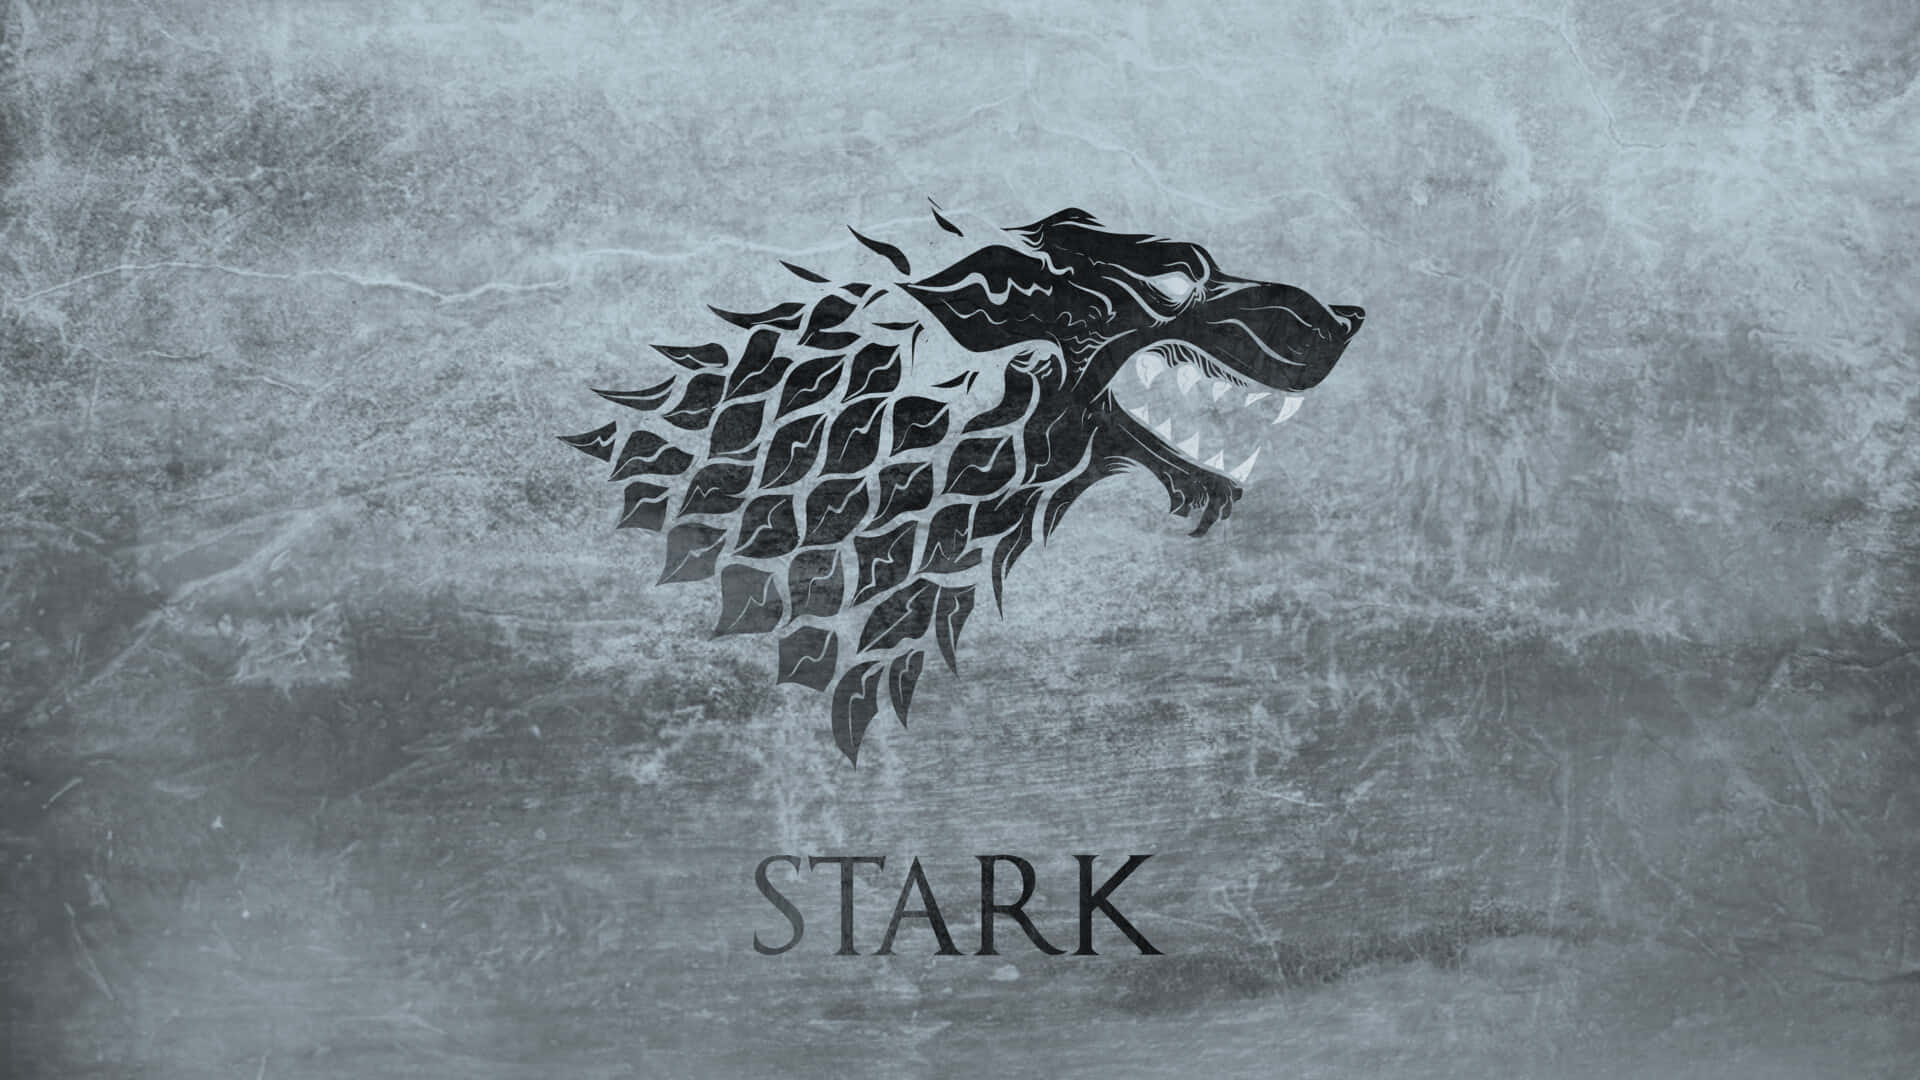 House Stark logo in Game of Thrones wallpaper - TV Show wallpapers